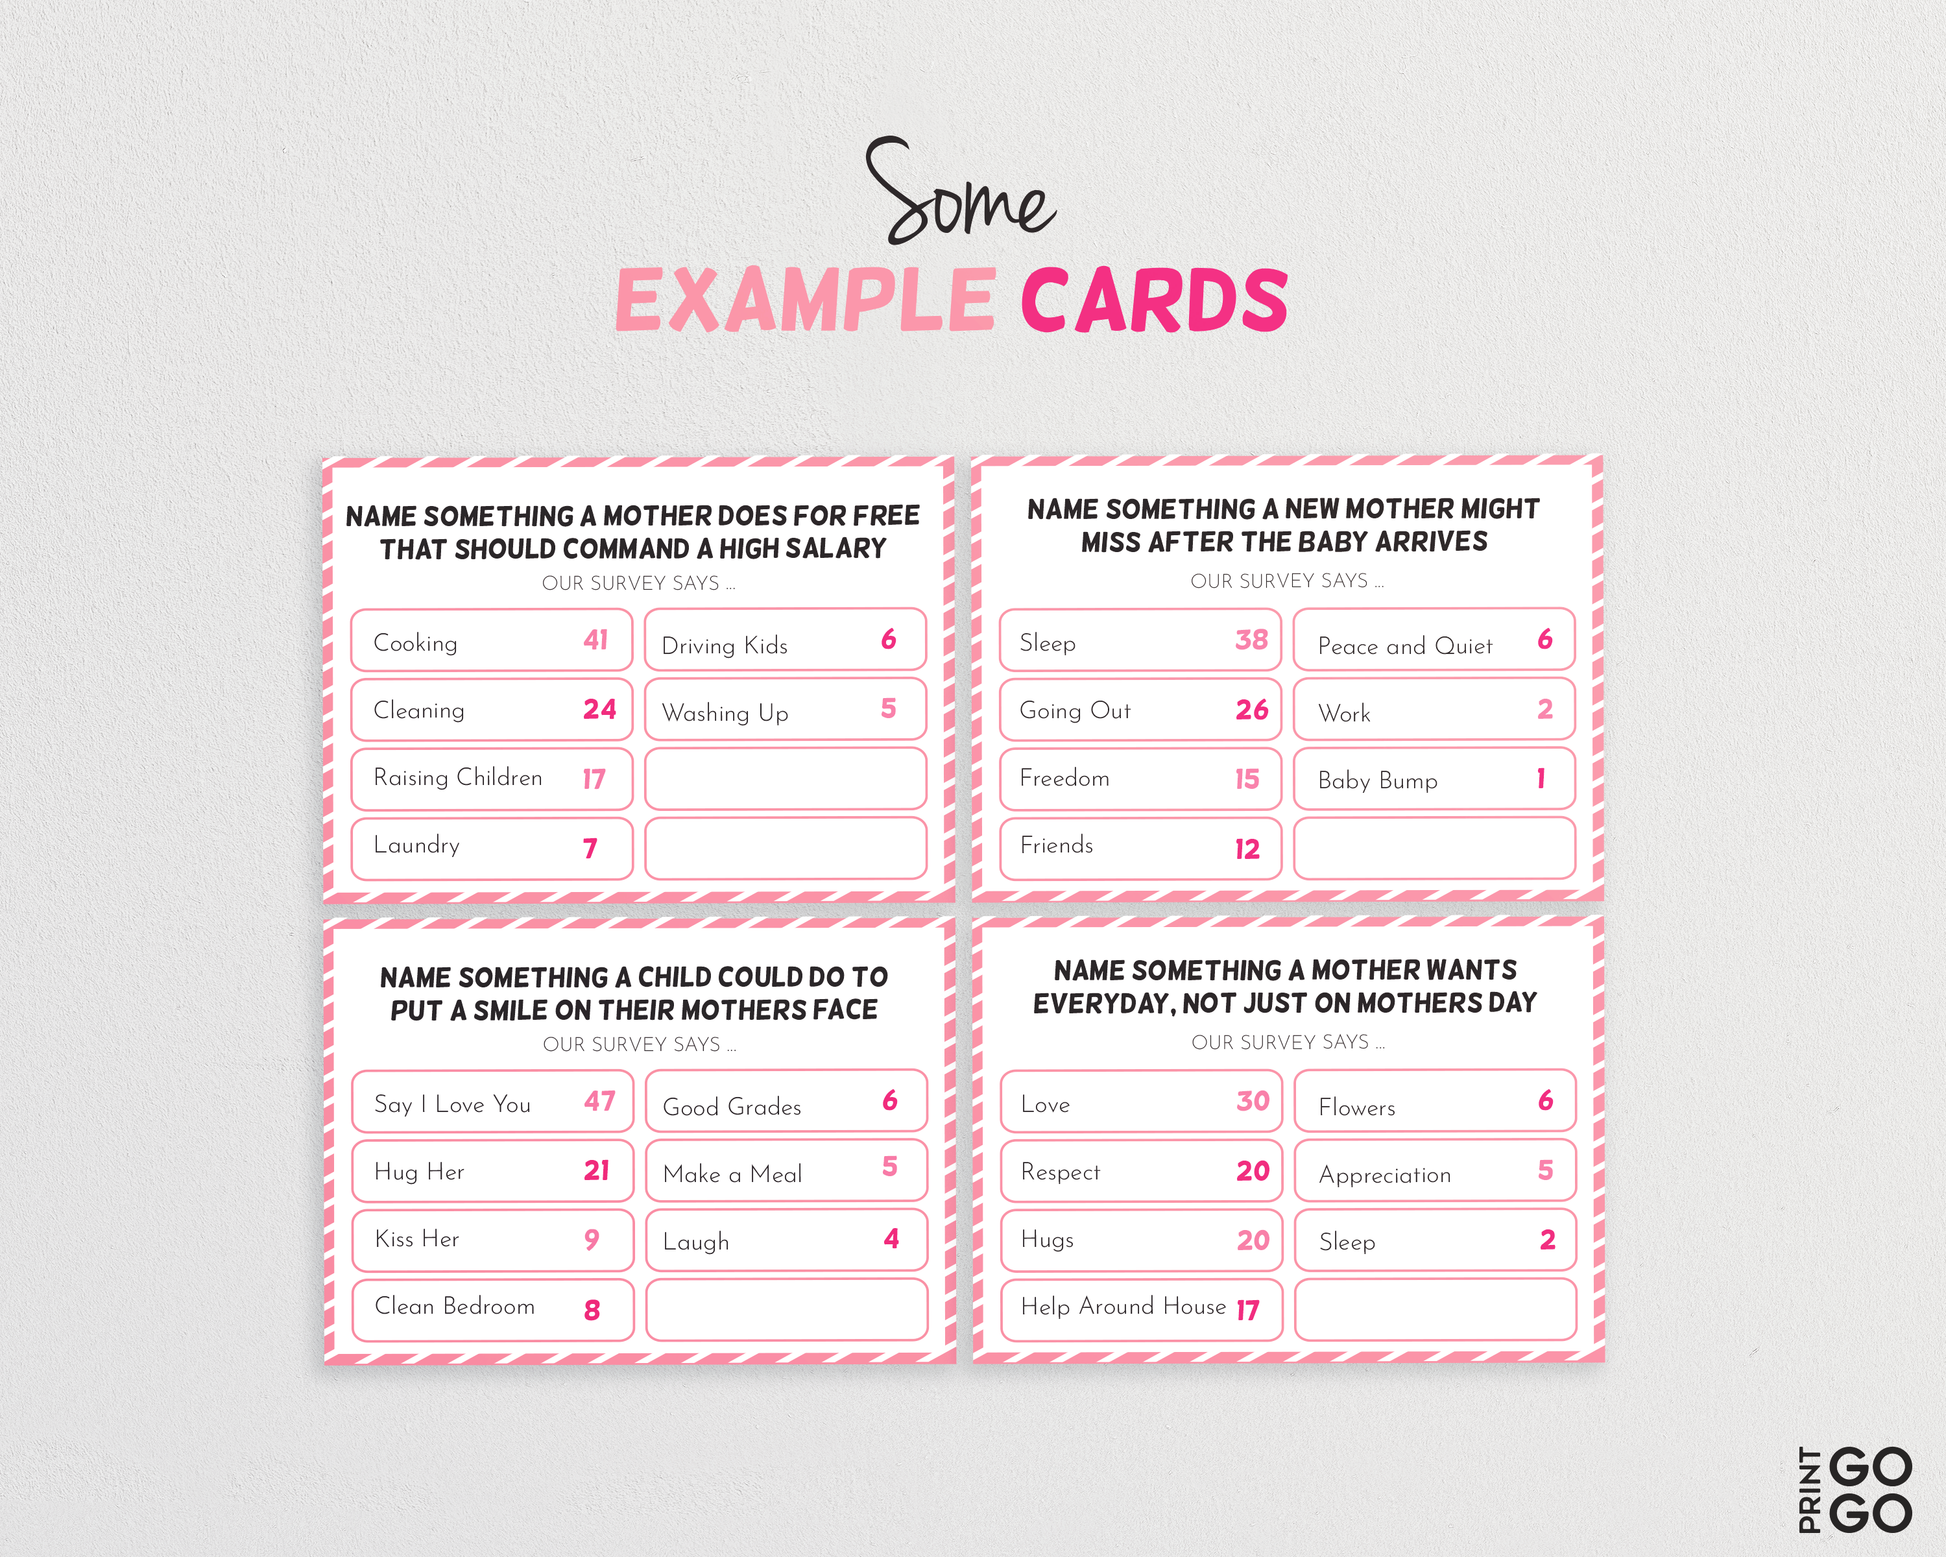 Example friendly feud cards.